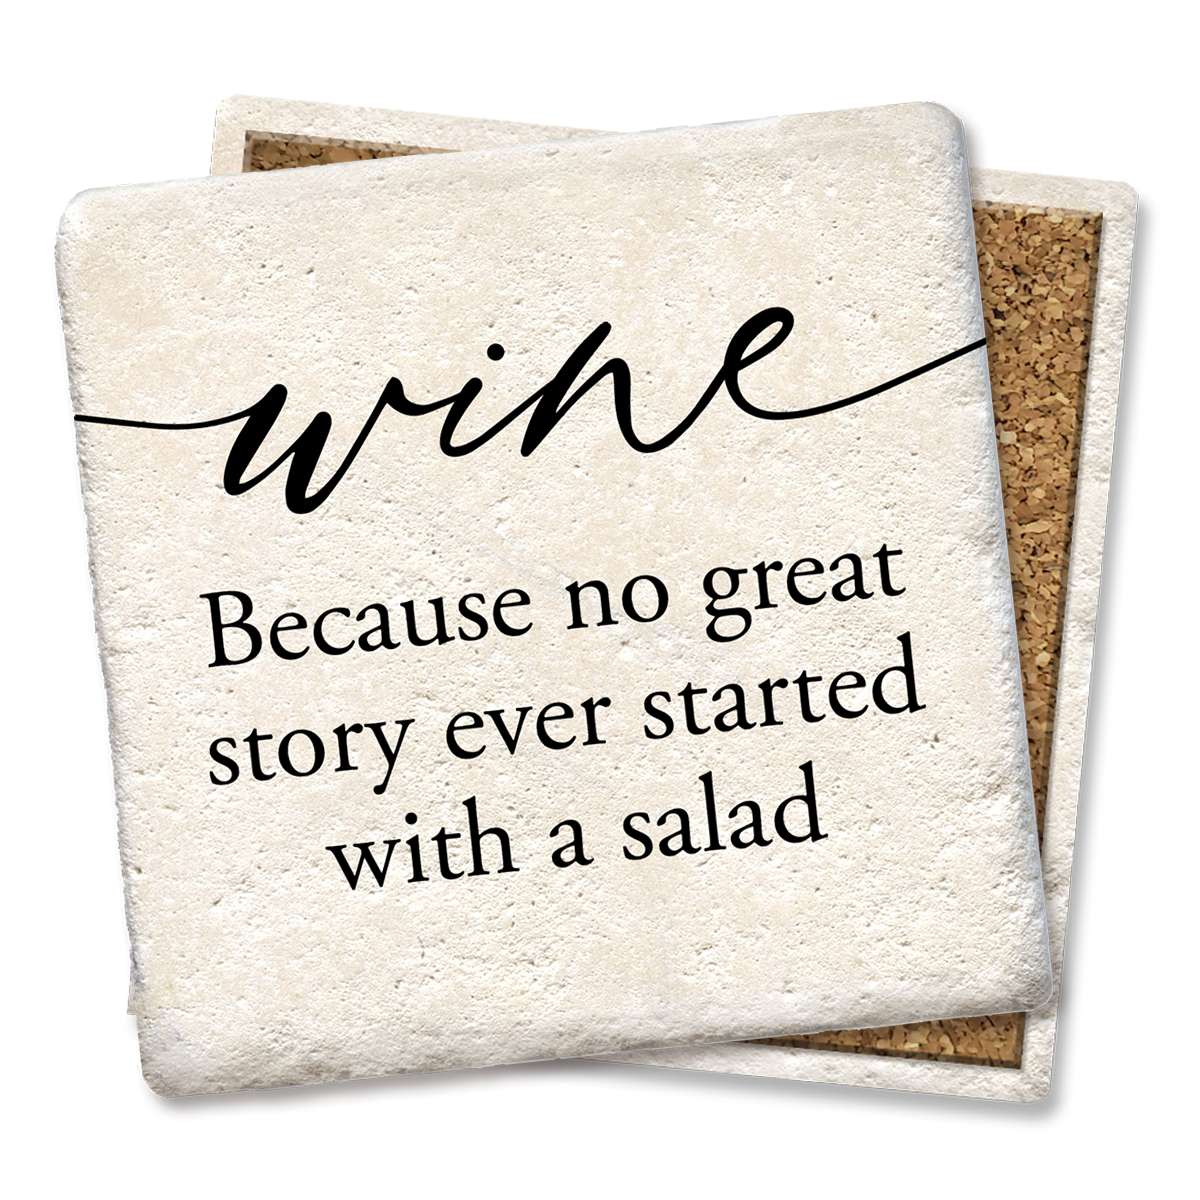 COASTERS WINE BECAUSE NO GREAT STORY COASTER  Tipsy Coasters & Gifts   